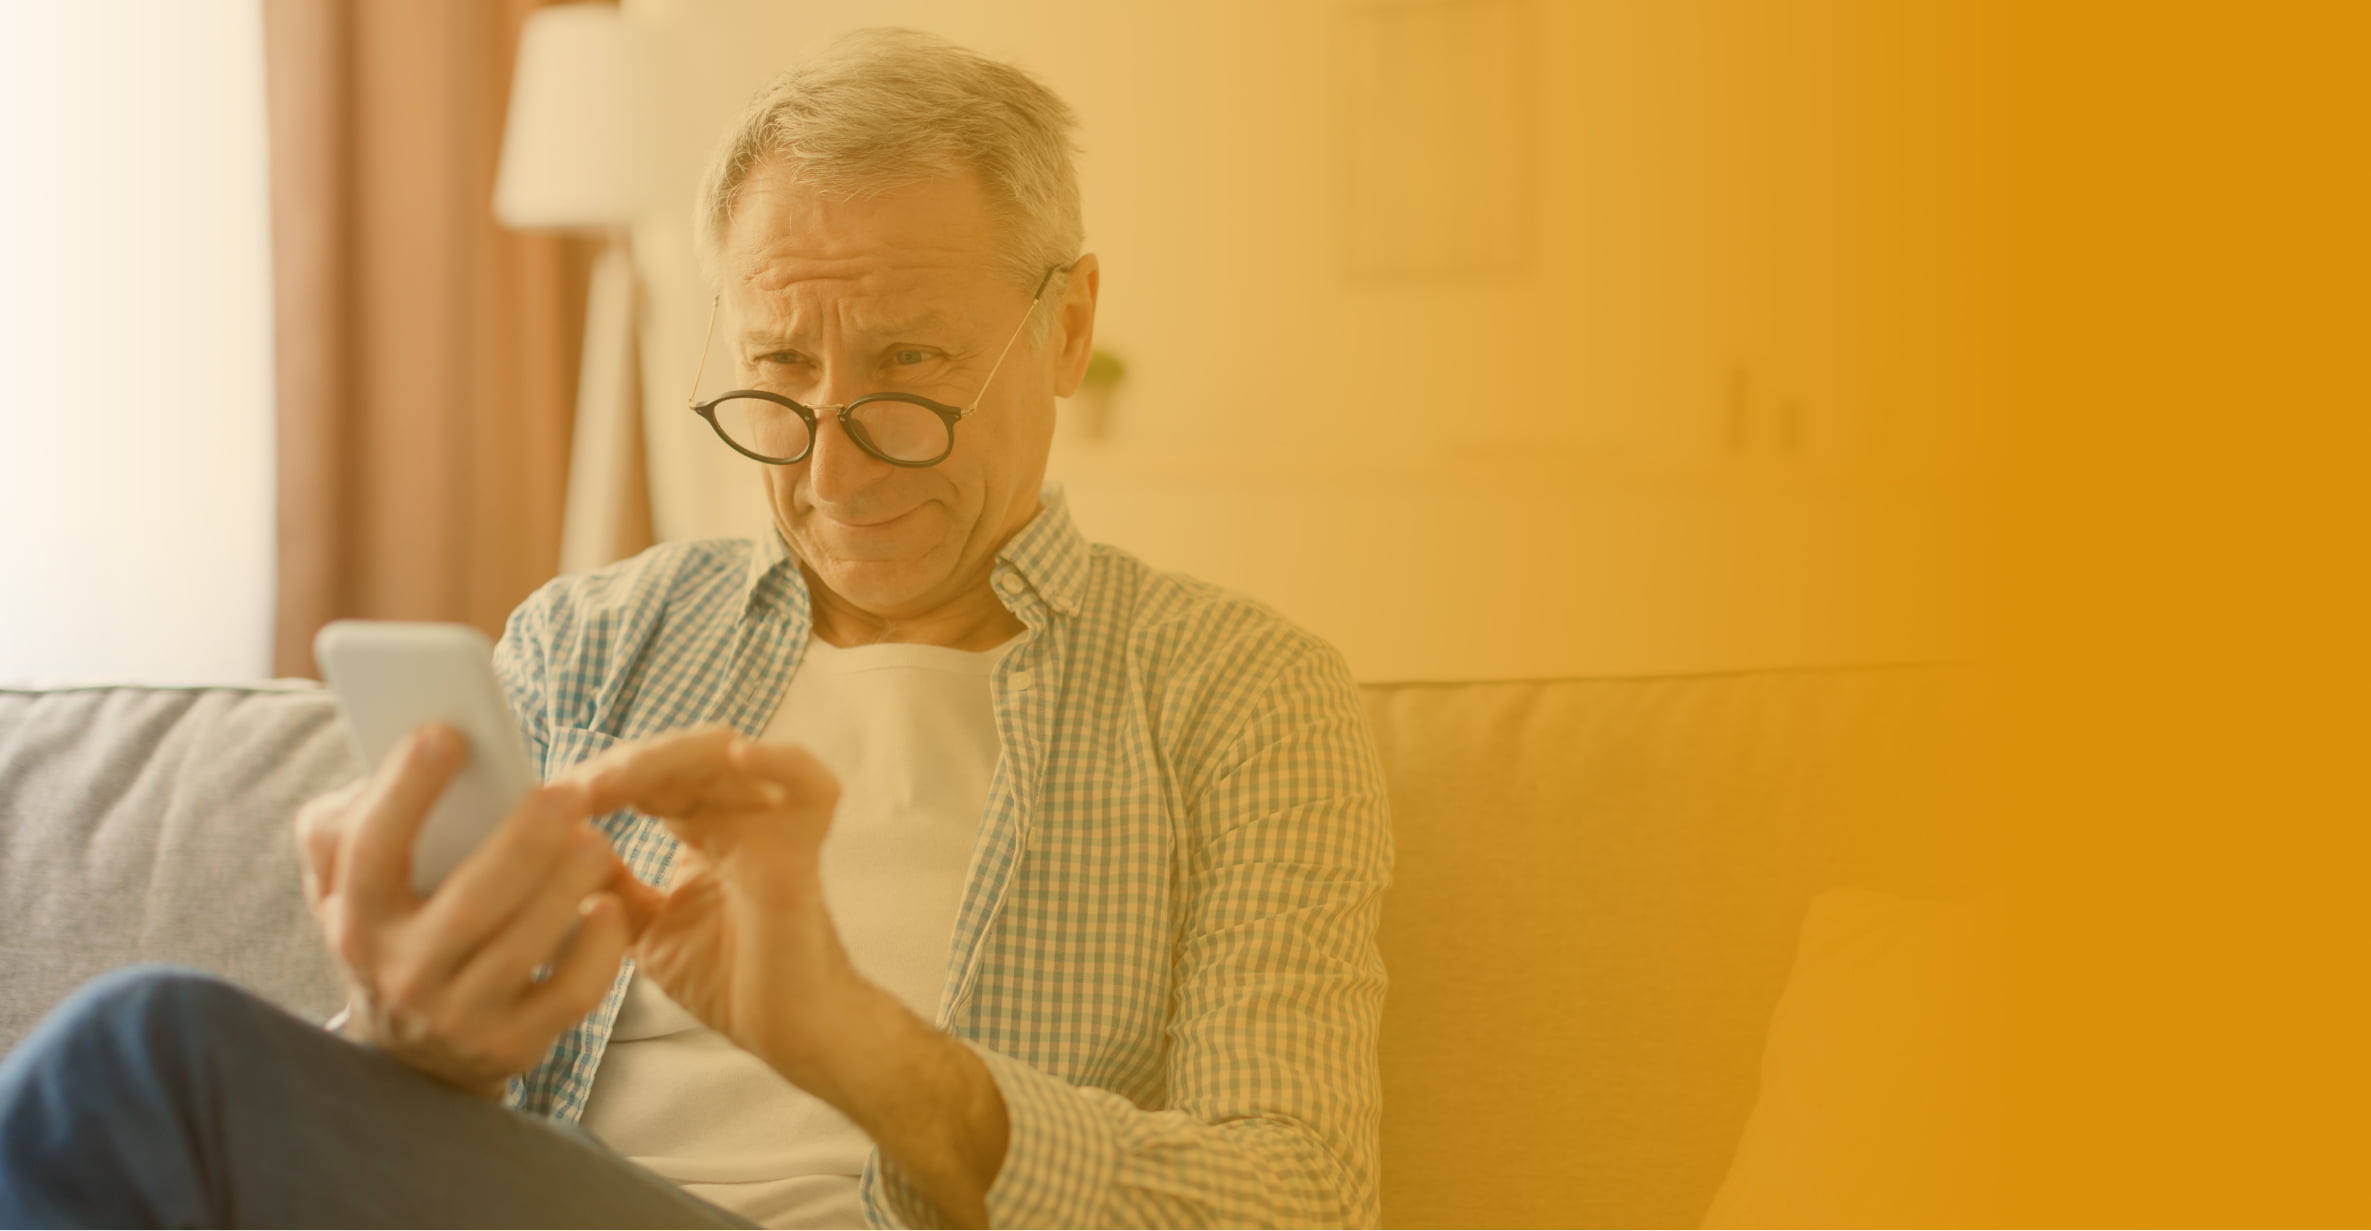 healthcare web accessibility. Elderly man squinting at phone